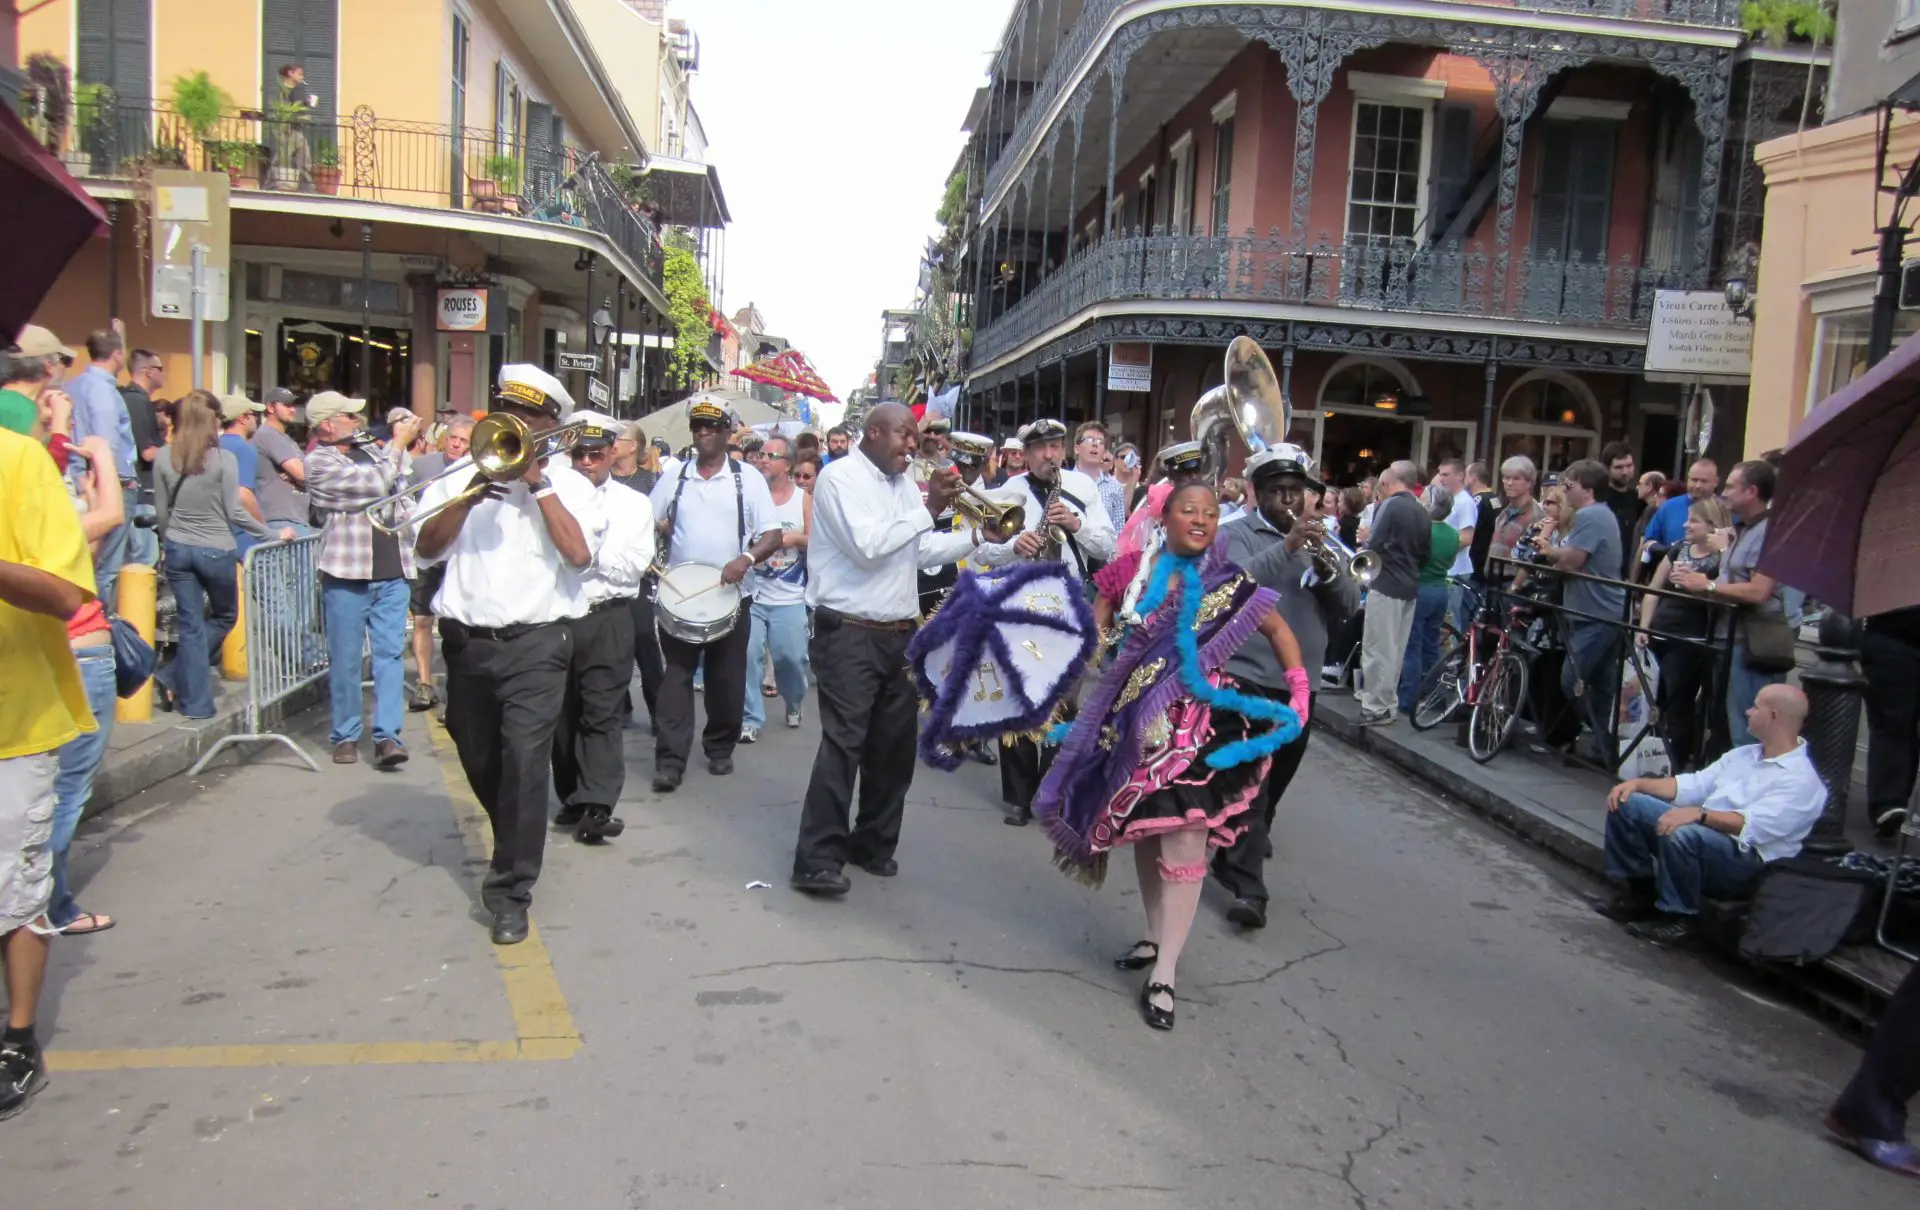 new orleans culture and tourism fund